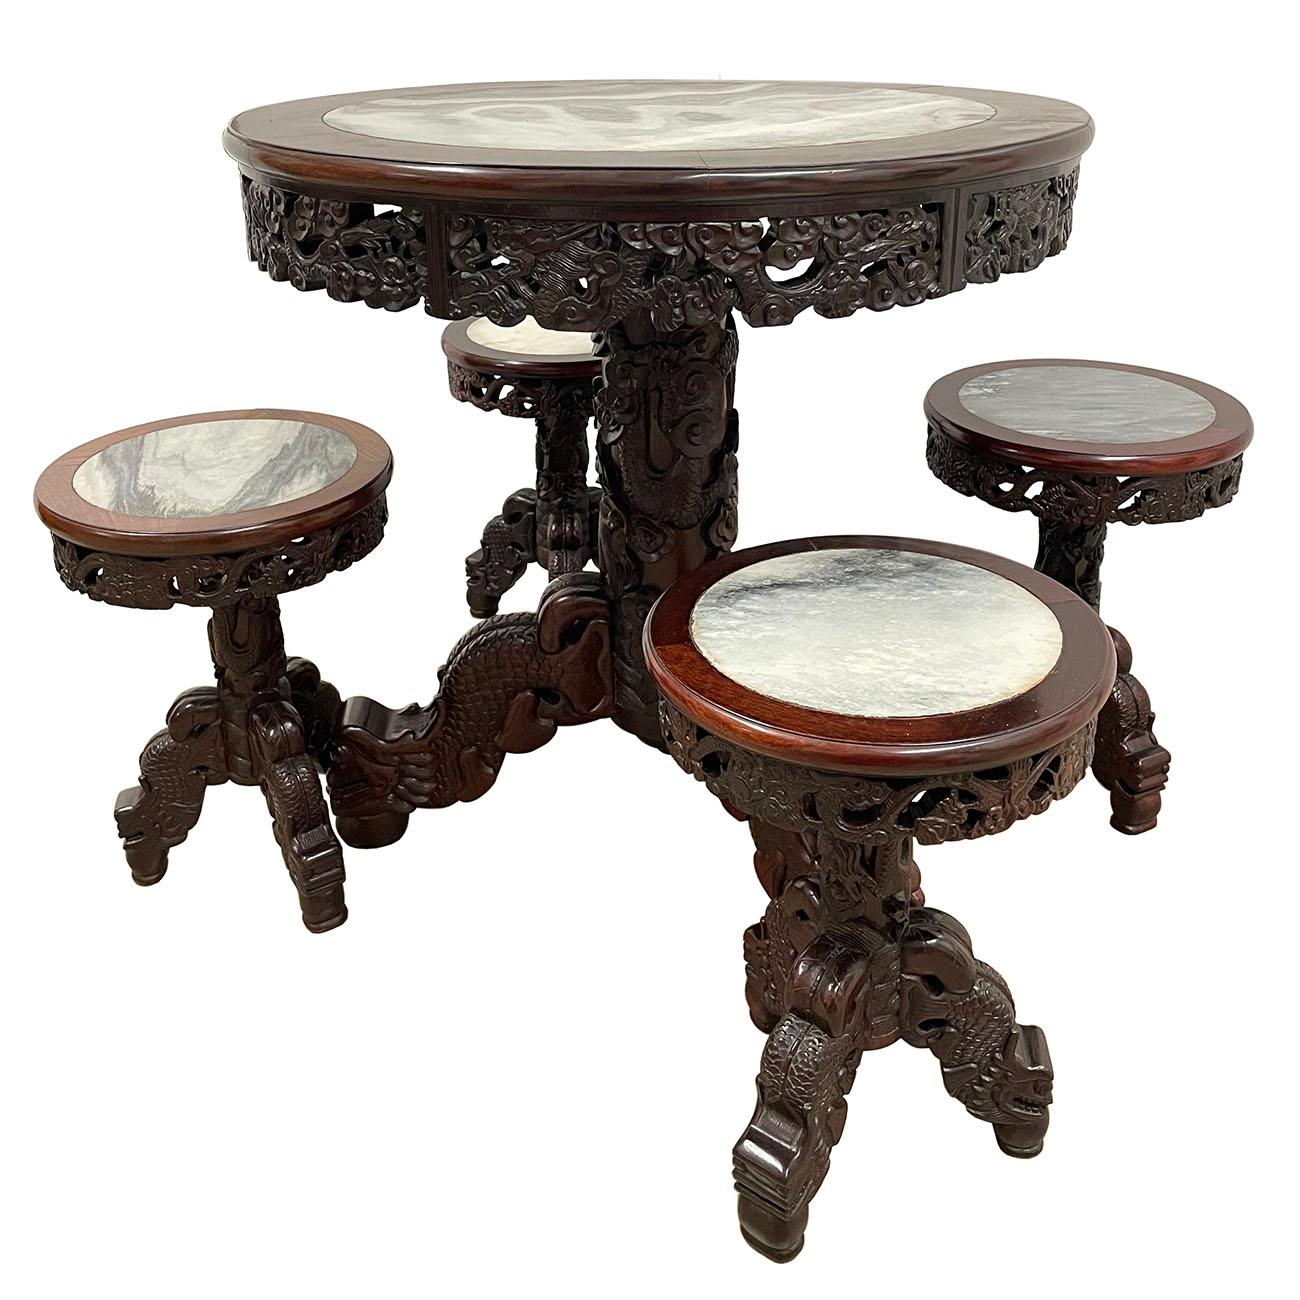 This gorgeous antique Chinese marble top hardwood round dinning table set were made of solid hardwood. It features hand carved wood works of traditional Chinese folks art of dragon motif and cloud design on the side of table, stools and Leg support.